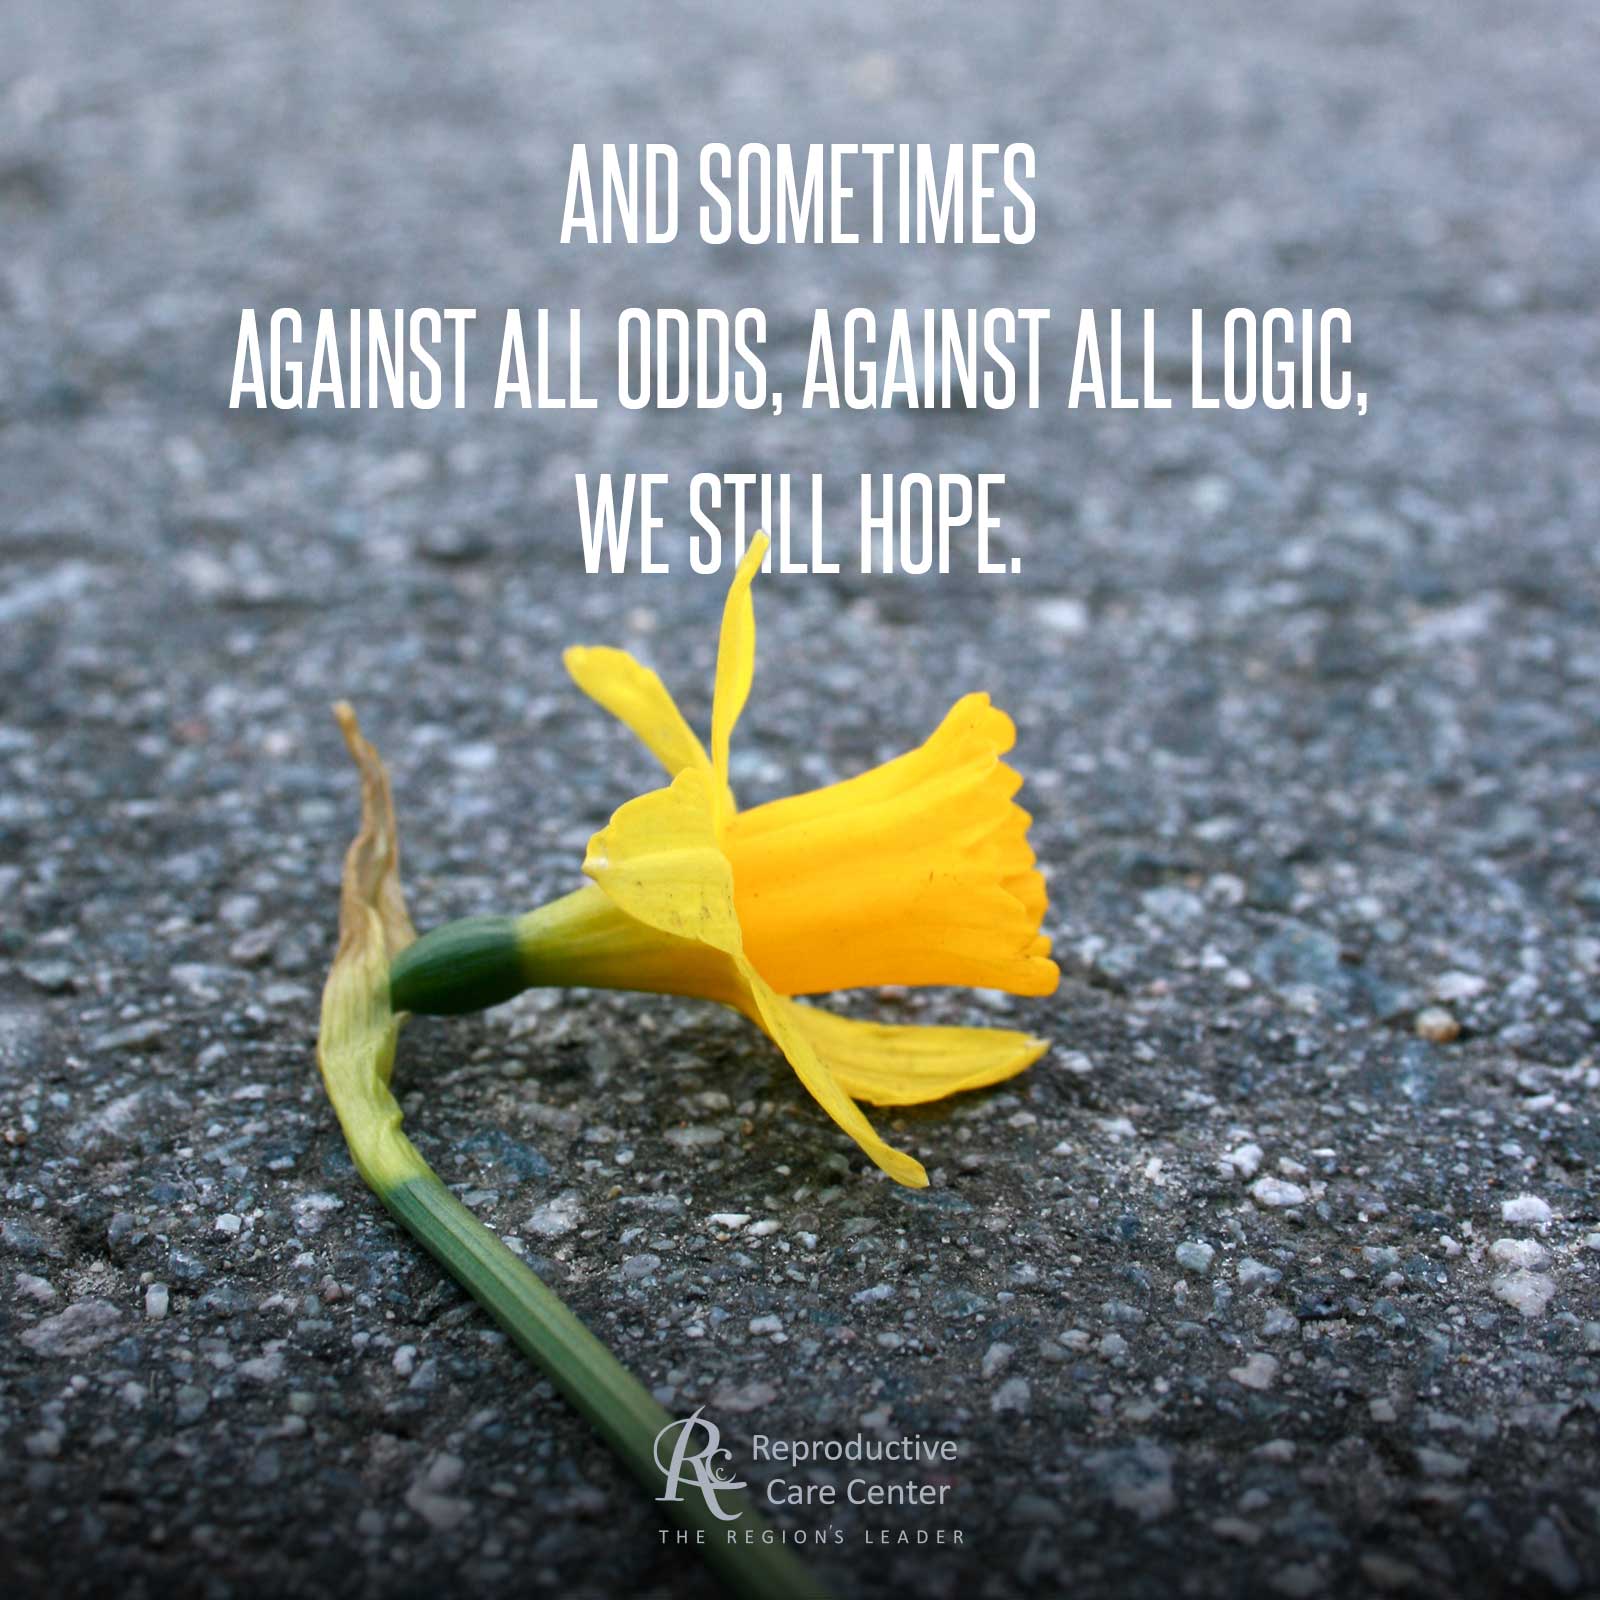 And sometimes against all odds, against all logic, we still hope